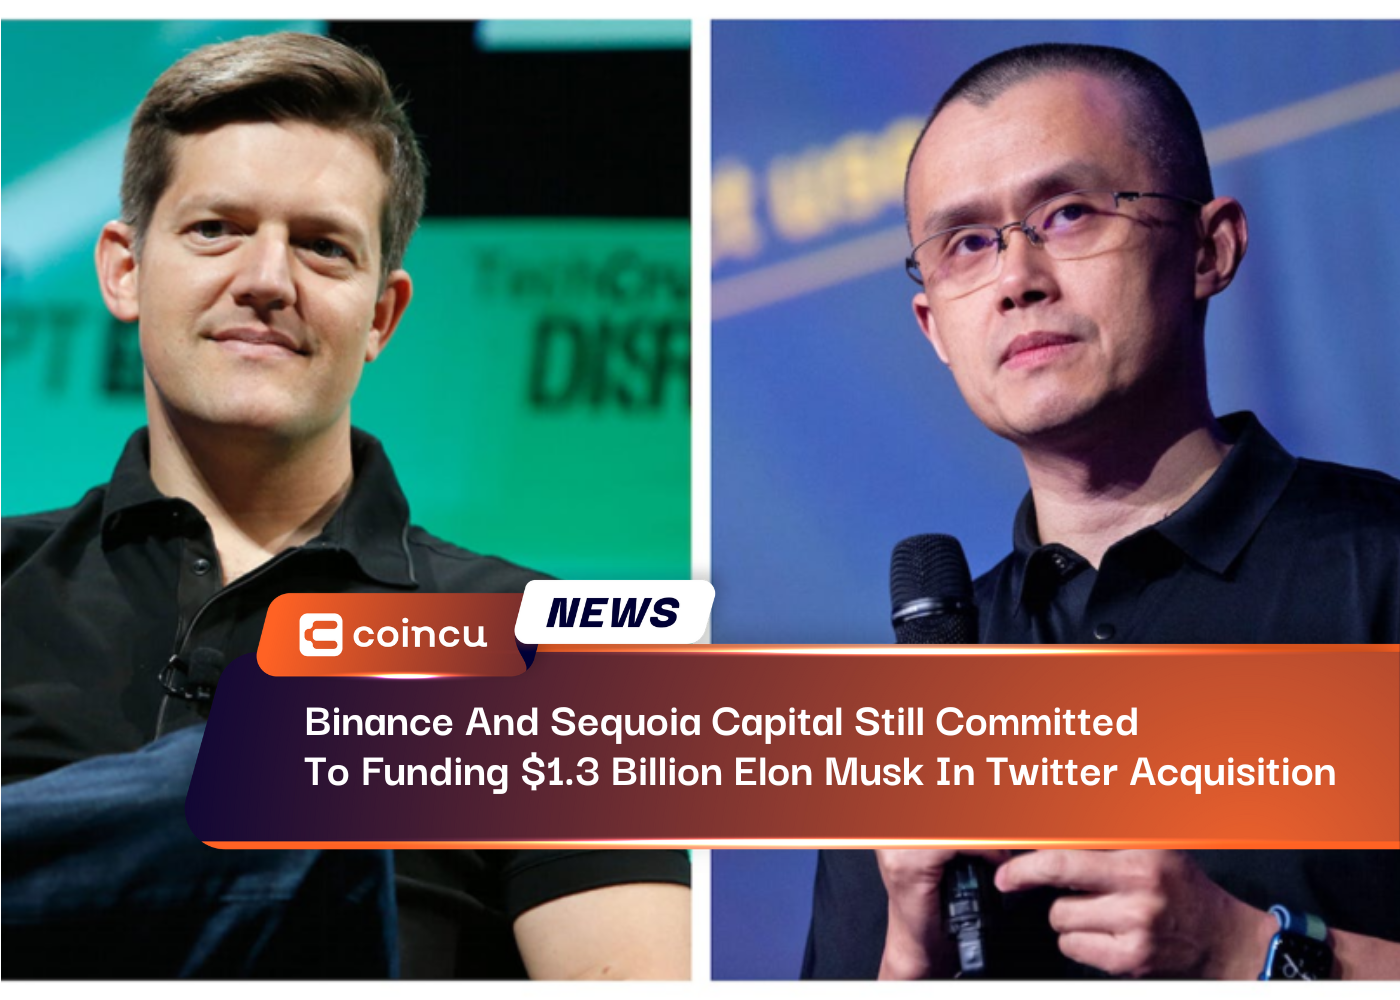 Binance And Sequoia Capital Still Committed To Funding $1.3 Billion Elon Musk In Twitter Acquisition